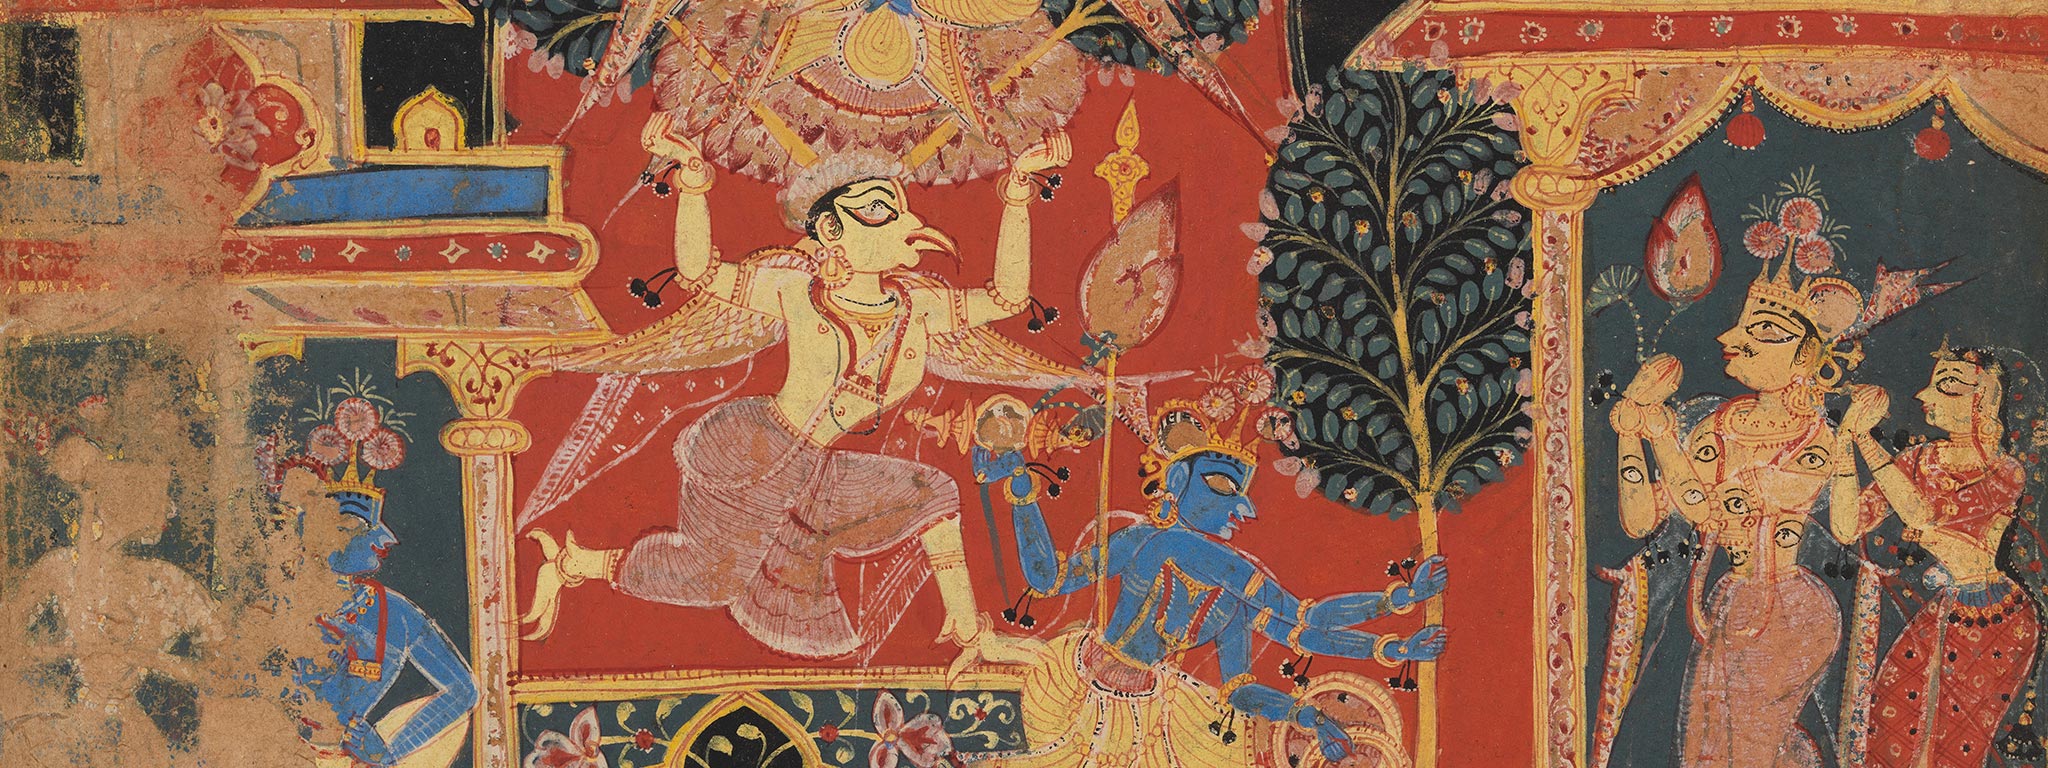 Krishna Uprooting the Parijata Tree (detail), folio from a Bhagavata Purana manuscript (text in Sanskrit), Delhi region or Rajasthan, India, artist unknown,1525–50; opaque watercolor and ink on paper. Los Angeles County Museum of Art. The Nasli and Alice Heeramaneck Collection, Museum Associates Purchase. Photo © Museum Associates/LACMA